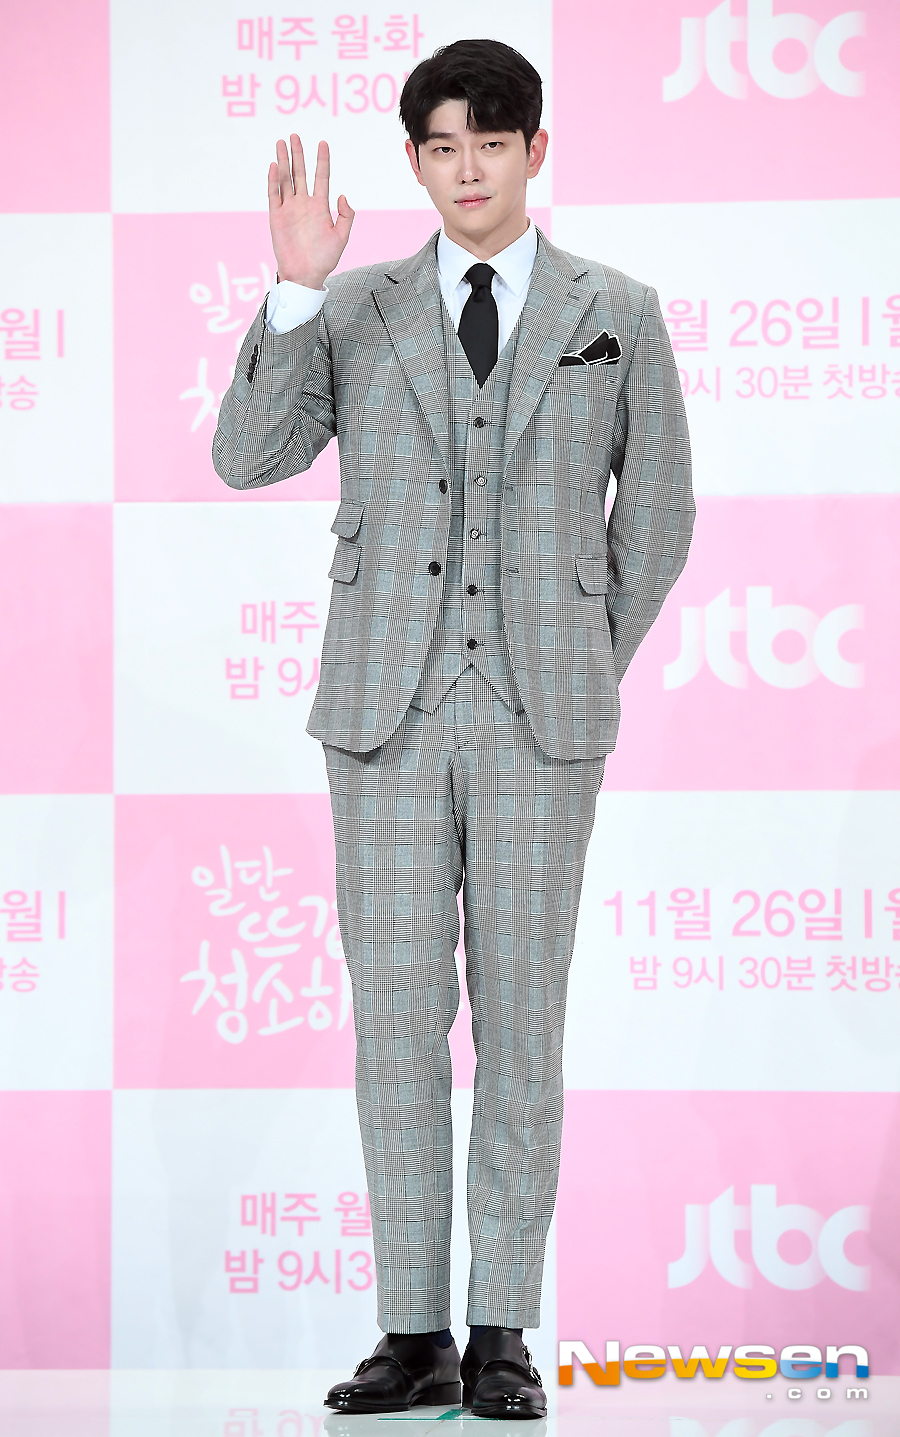 The JTBC New Moonwha drama Once Clean Up Hot (playplayplay by Han Hee-jung/directed by Noh Jong-chan) was presented at the Juamorris Stewart Convention in Time Square, Yeongdeungpo-gu, Seoul, at 2 p.m. on November 26.On that day, Yoon Kyun-sang poses.Once you clean hot starring Yoon Kyun-sang, Kim Yoo-jung, Song Jae-rim, Yoo Sun, Kim Min-kyu, Hakjin, and Cha In-ha, is the CEO of the flower cleaning company, which is more important than life. It is a aseptic healing romance that Kim Yoo-jung meets.